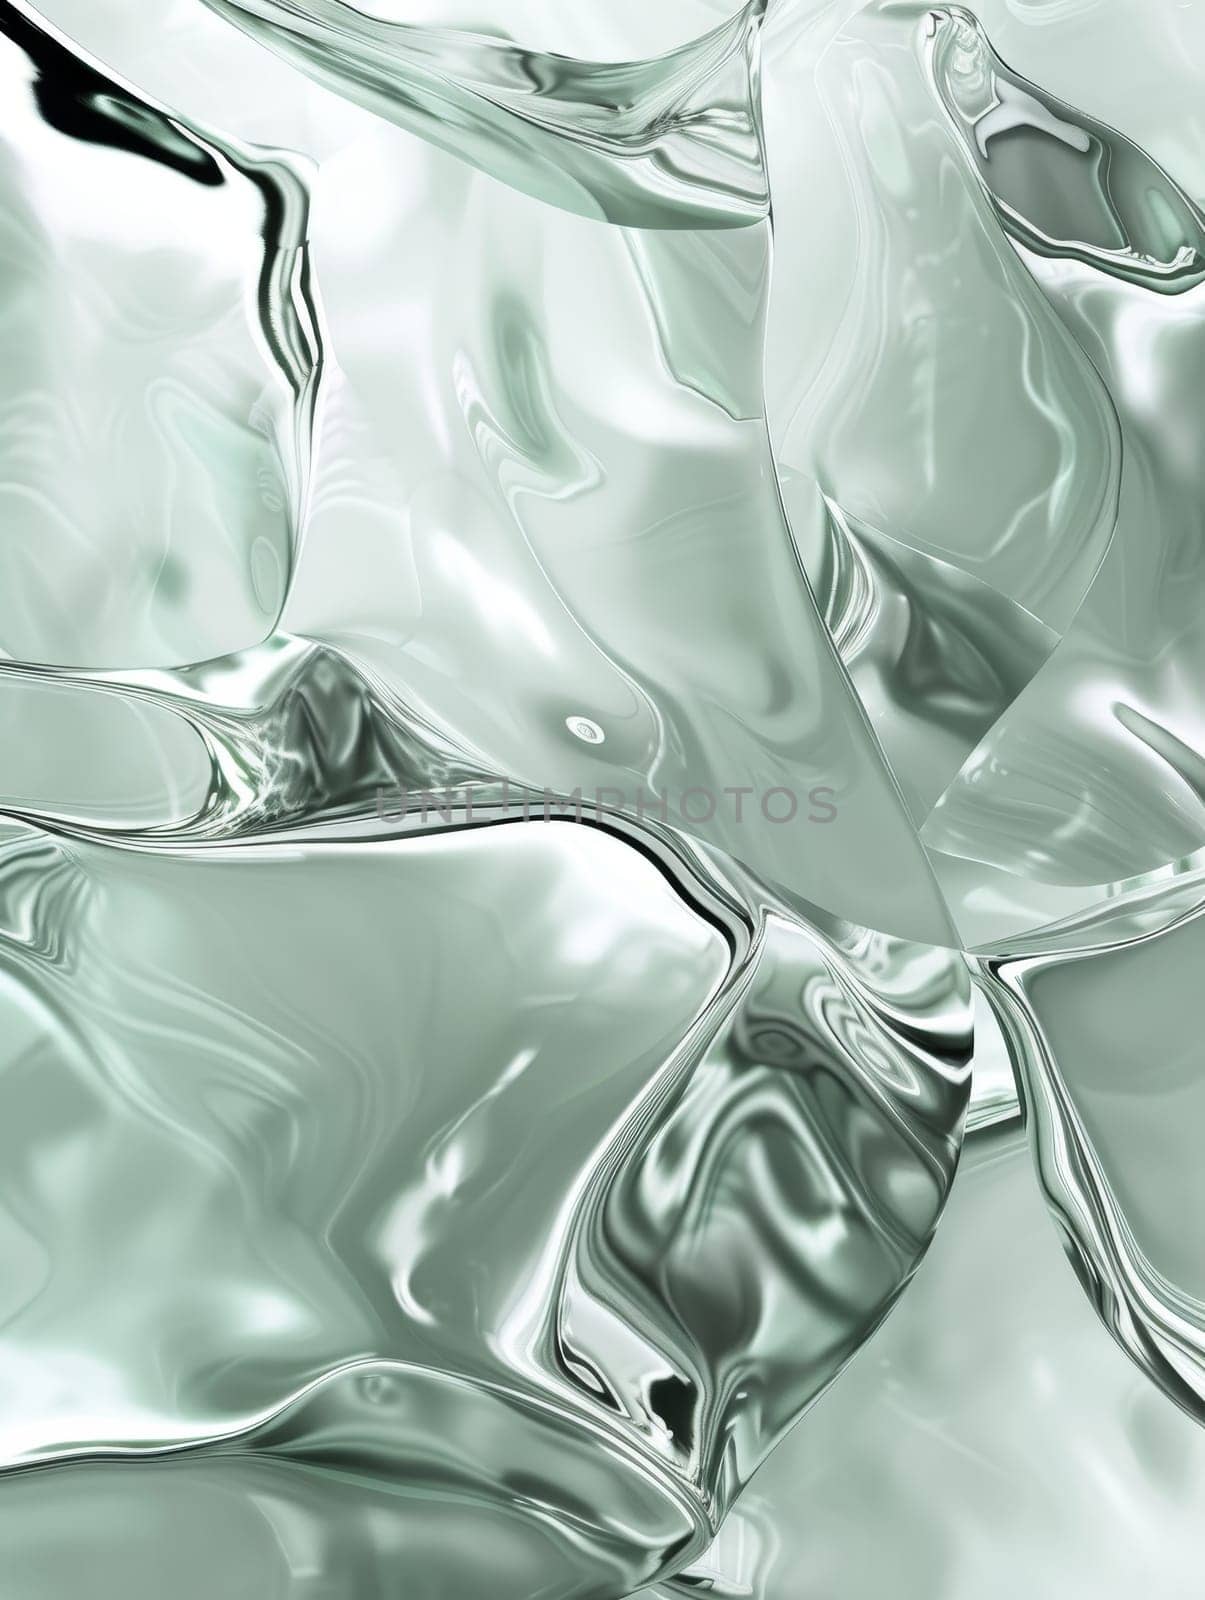 Digital abstract of liquid metal flow with a smooth, reflective, and wavy surface in tones of silver.. by sfinks